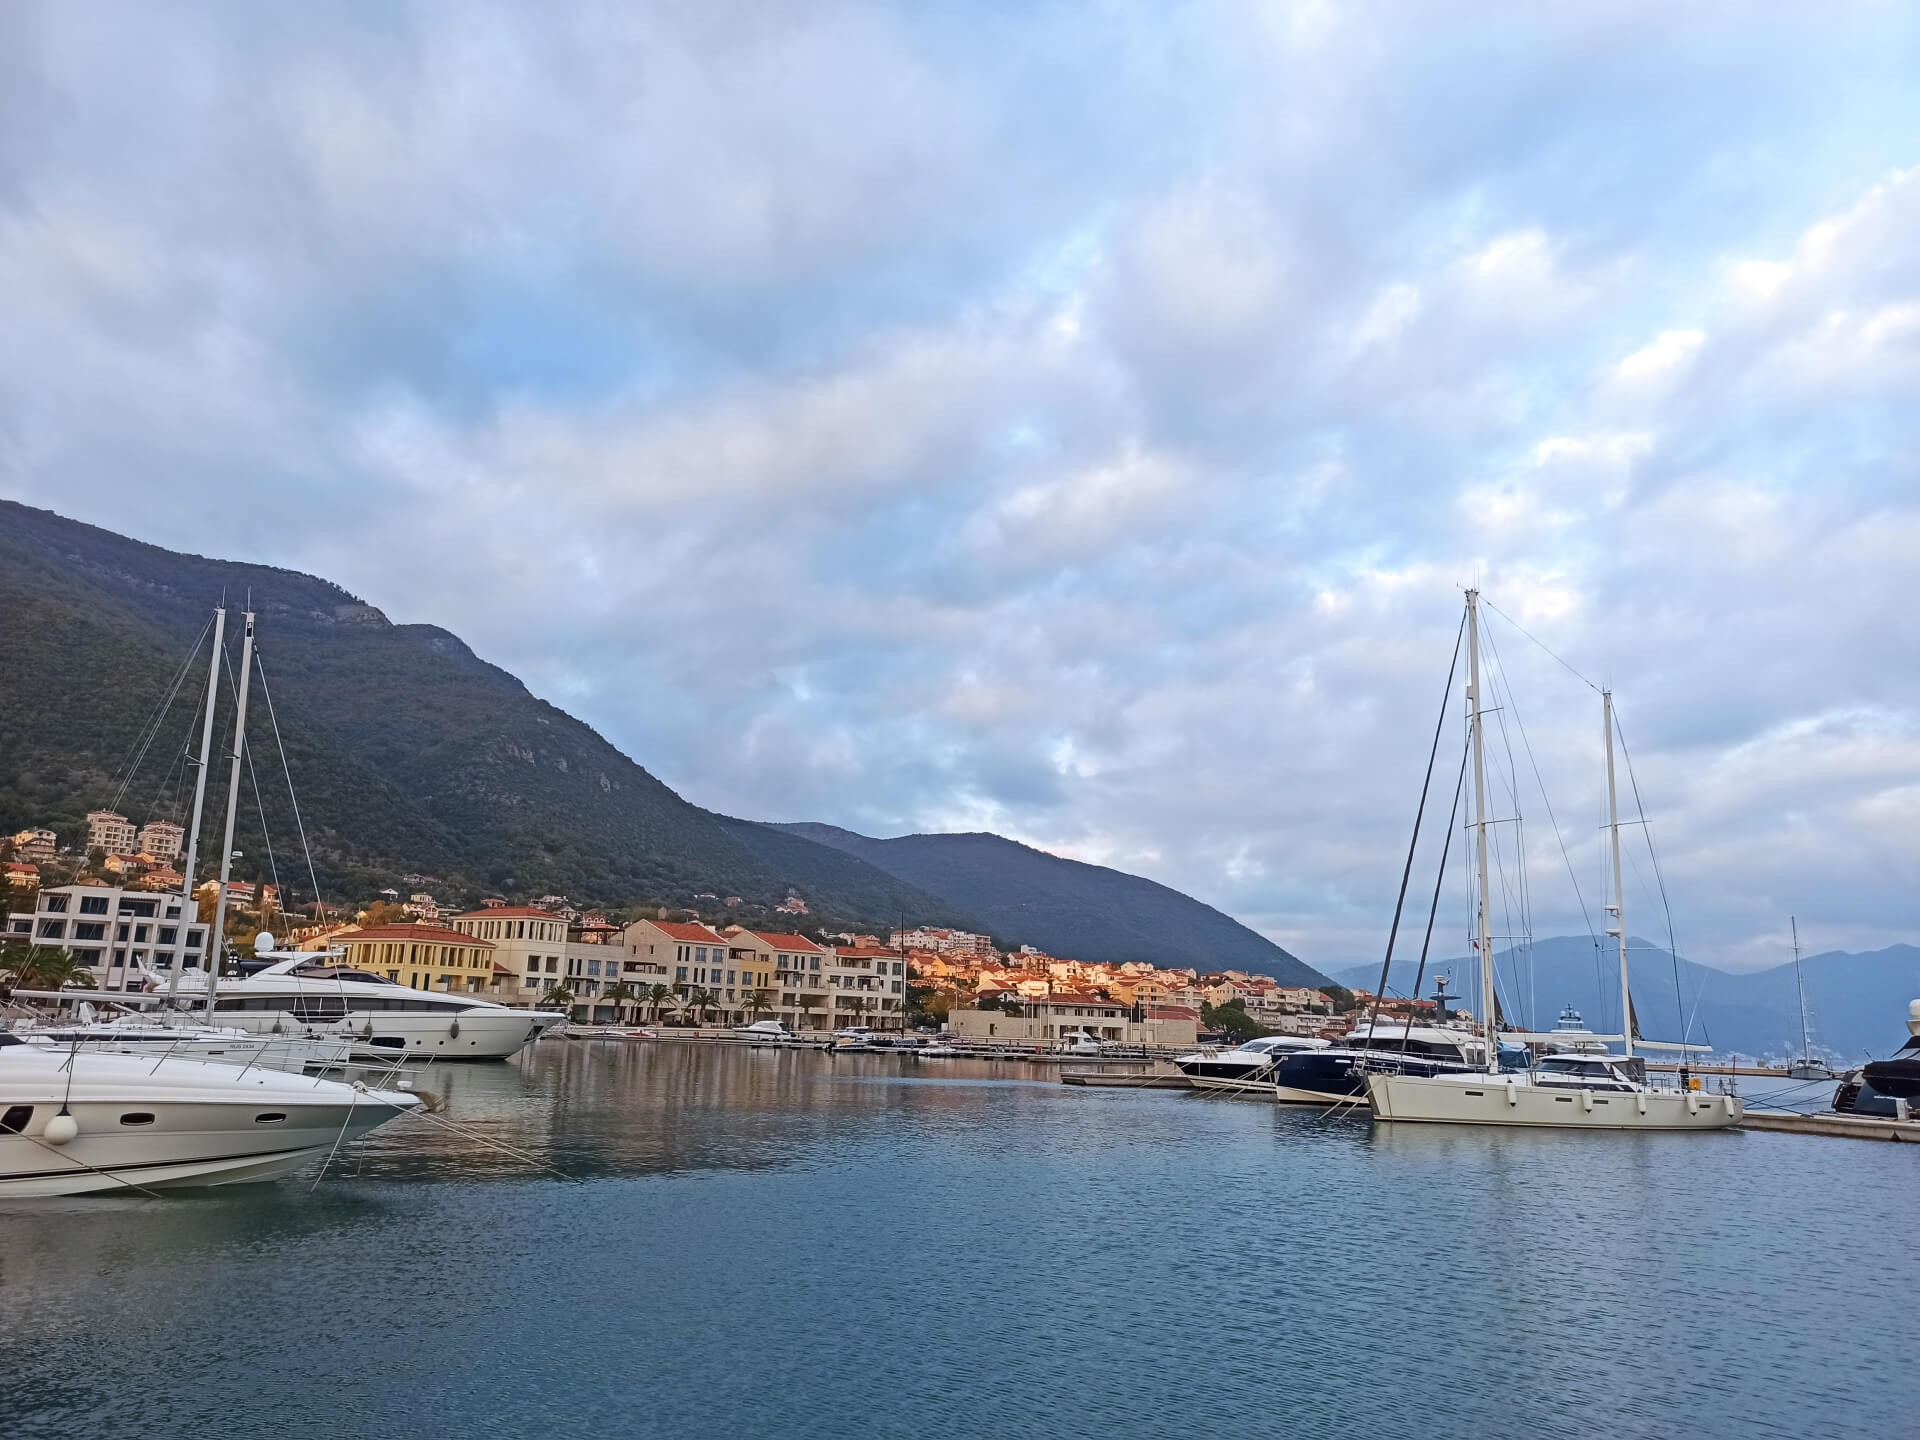 Yachts and mountains in Portonovi